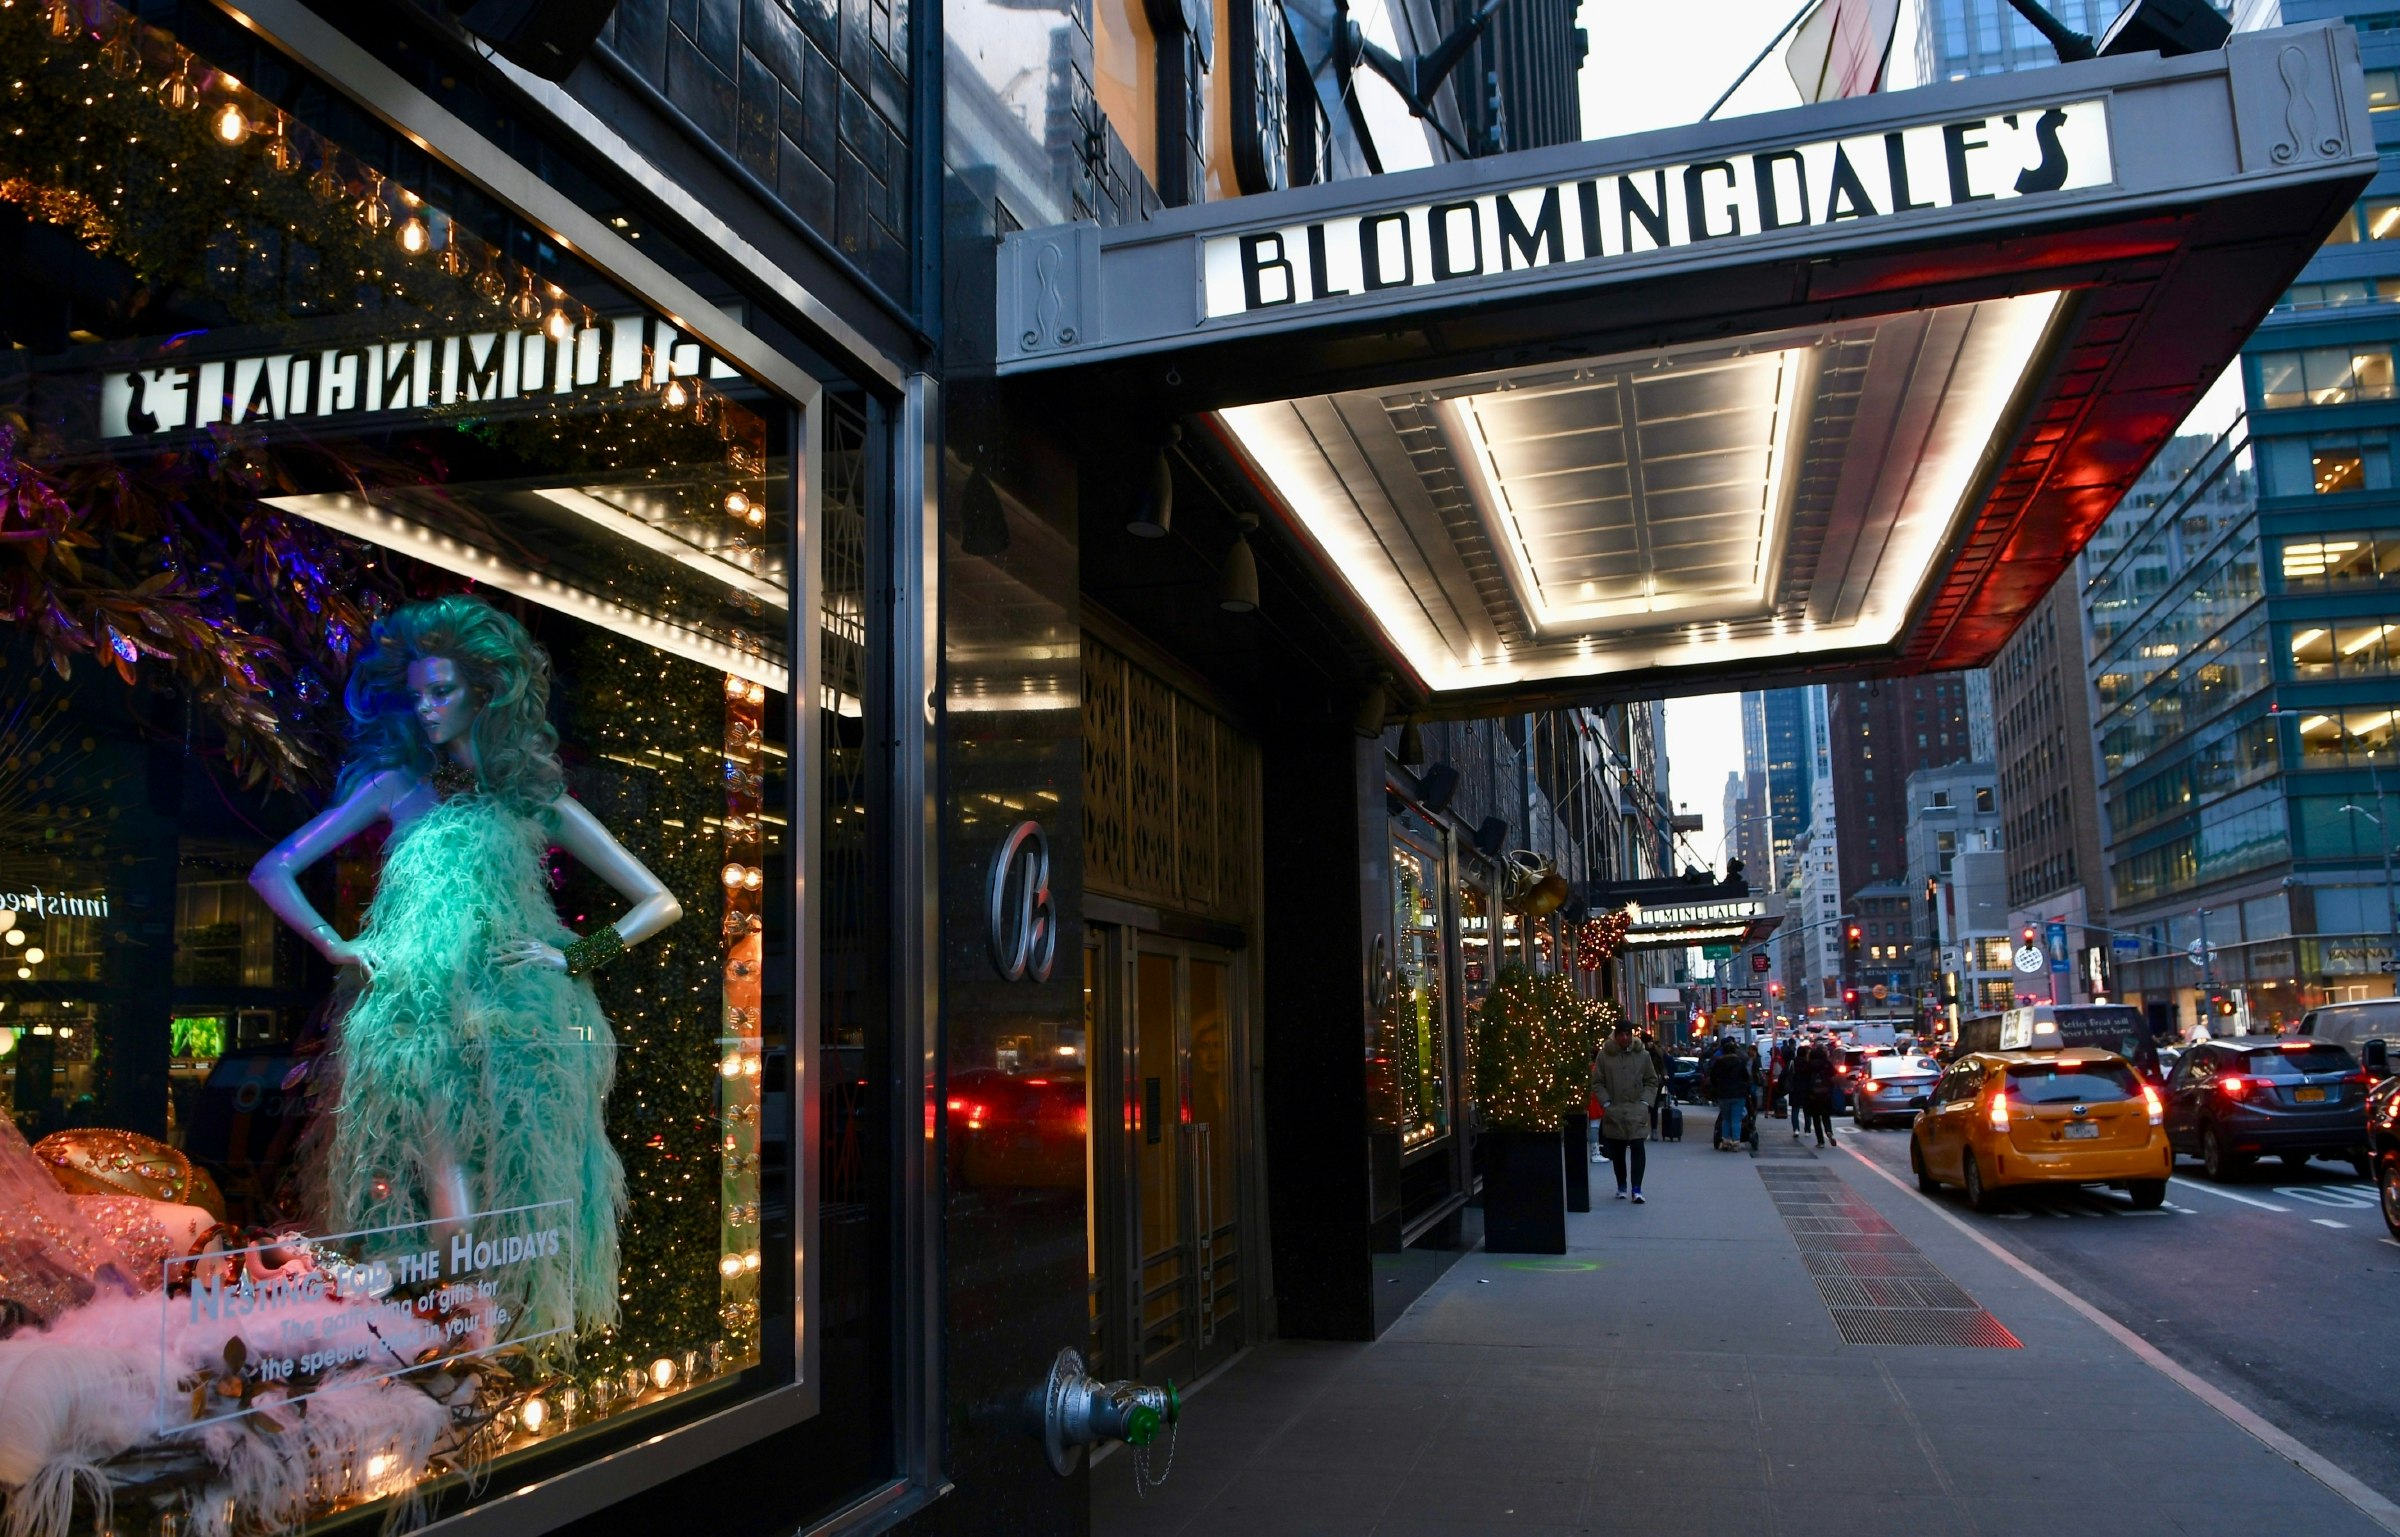 Display window outside Bloomingdale's on 59th Street and Lexington Avenue, New York City